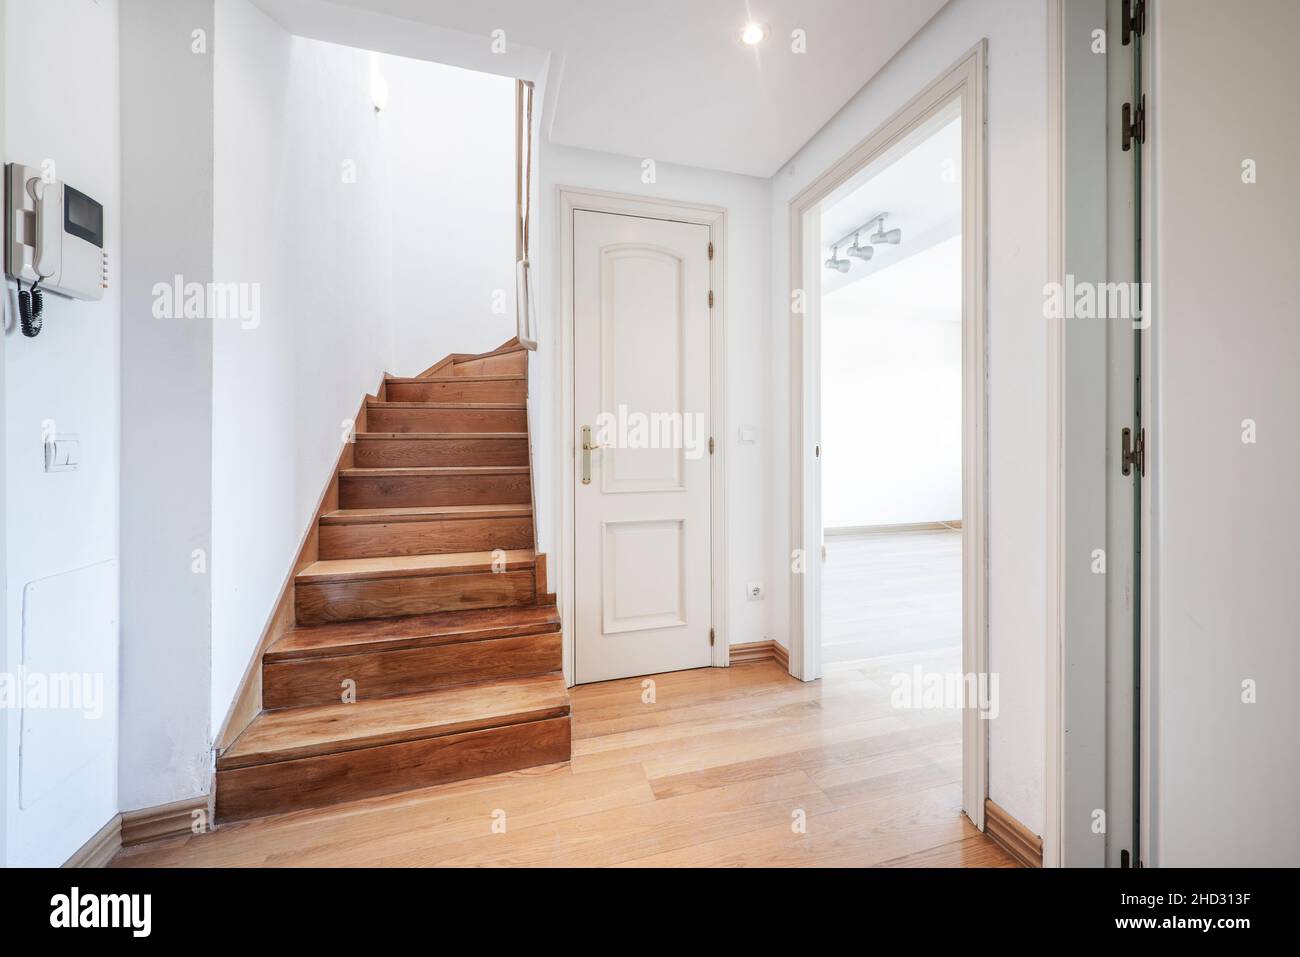 Duplex house with wooden stairs and entrance to a large living room Stock Photo